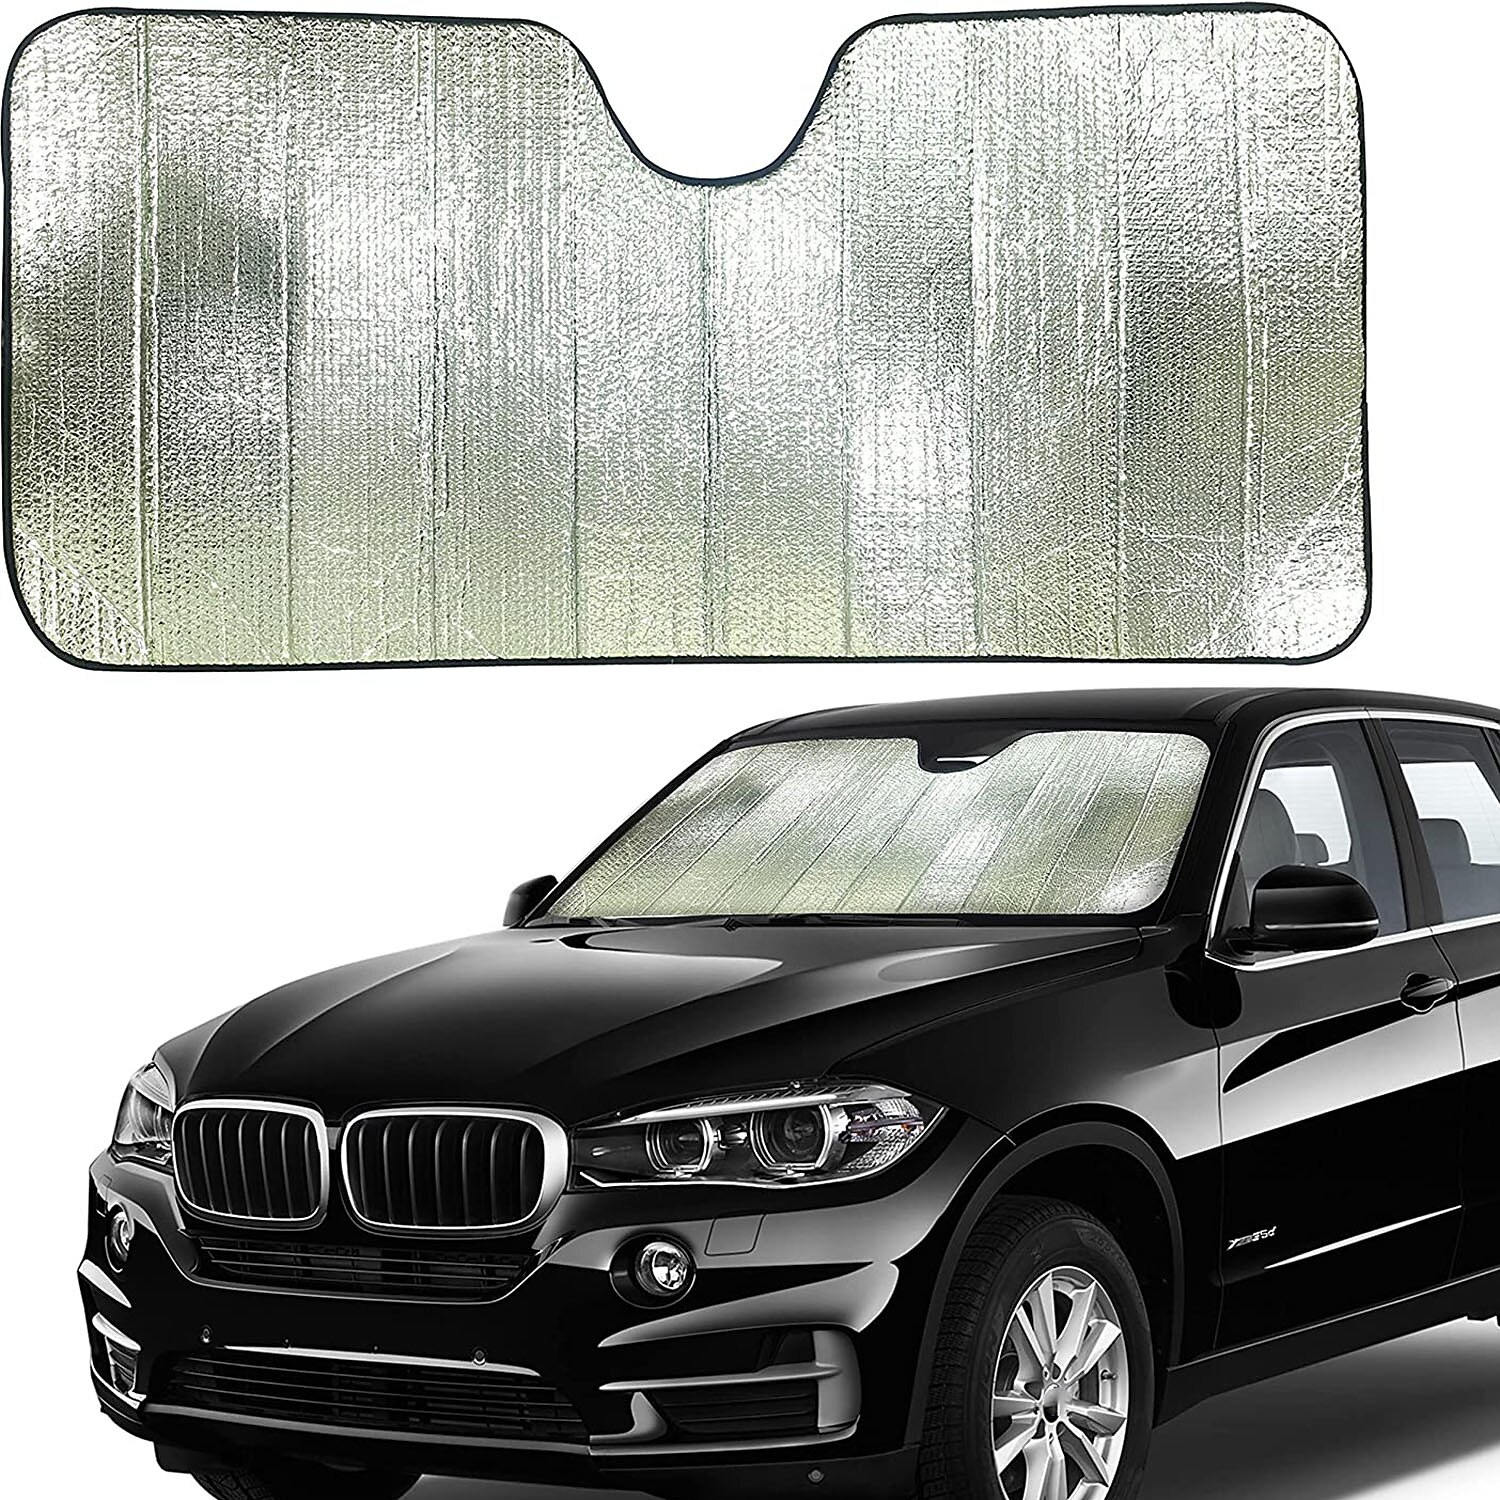 Windshield Cover Waterproof Cover Design Protects Front Windows and Rear Mirrors with Hooks Fixed Four Wheels Windshield Sun Shade Car Sun Shade Fits Most Vehicles Universal Car Sun Cover Reflectiv 